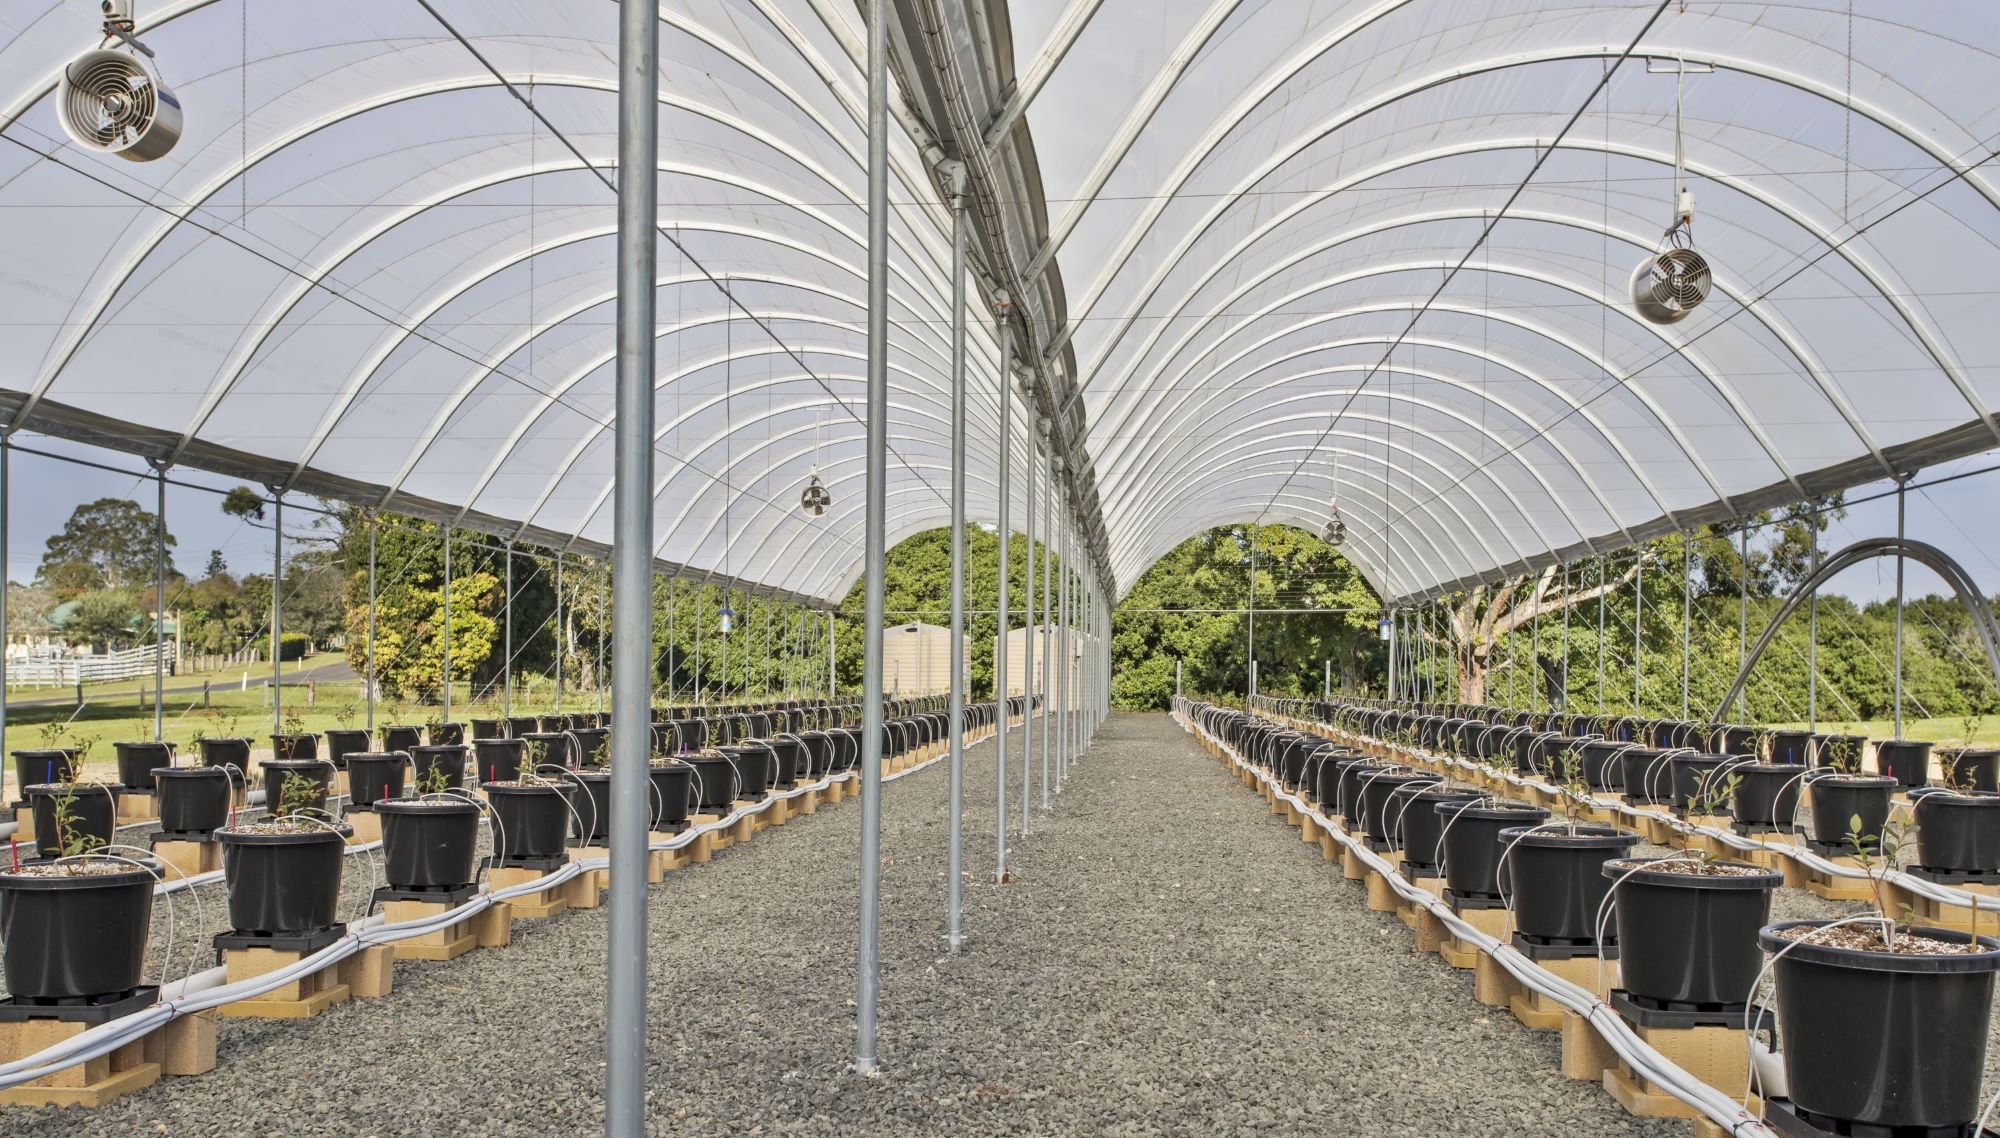 Rows of blueberry plants on either sides of metal poles at the centre of a long tunnel, with a roof made up of two curved fabric covers, and open sides.